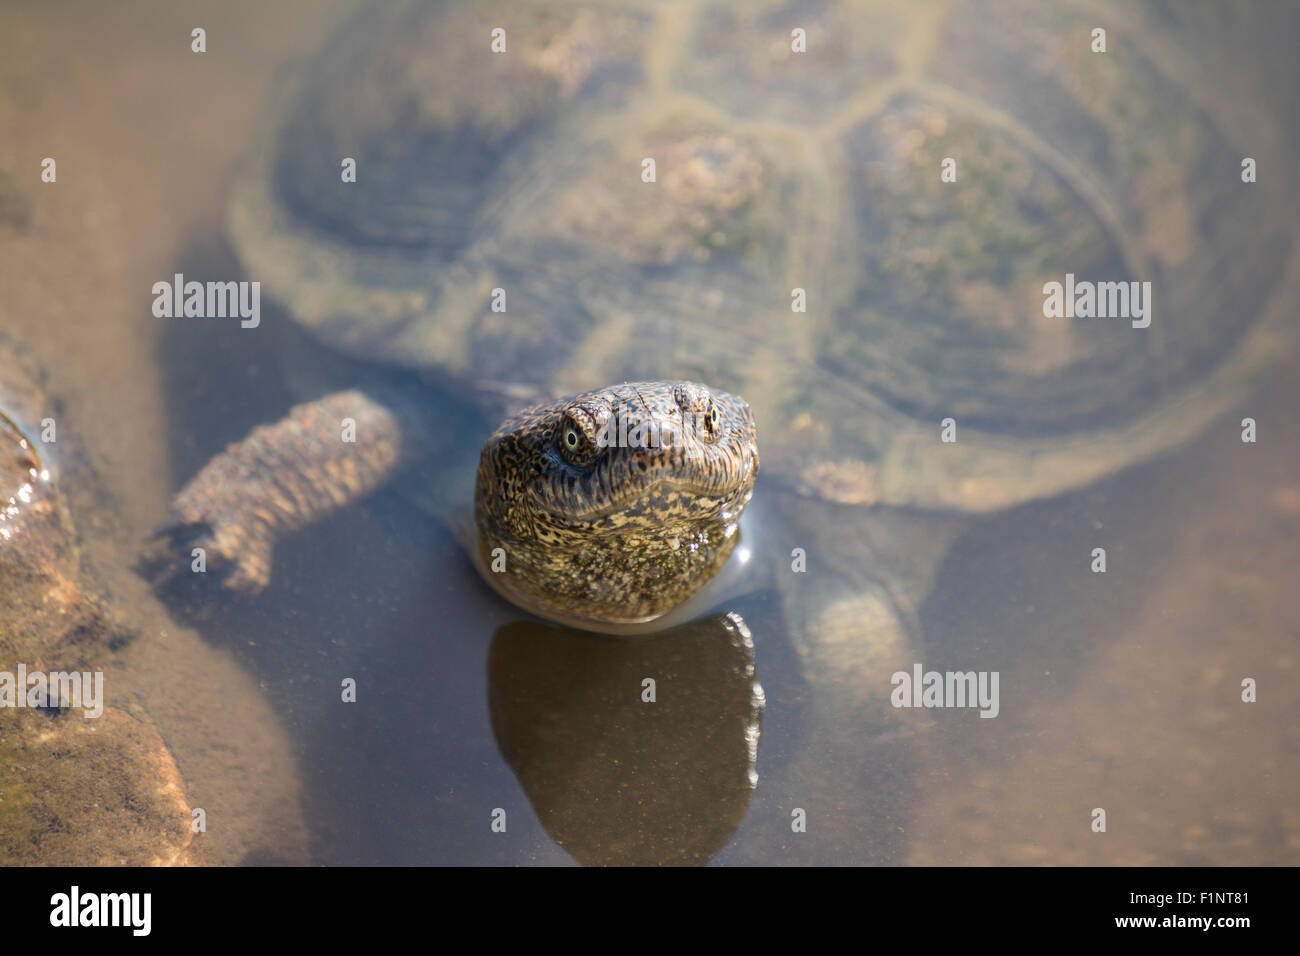 A terrapin in shallow water Stock Photo